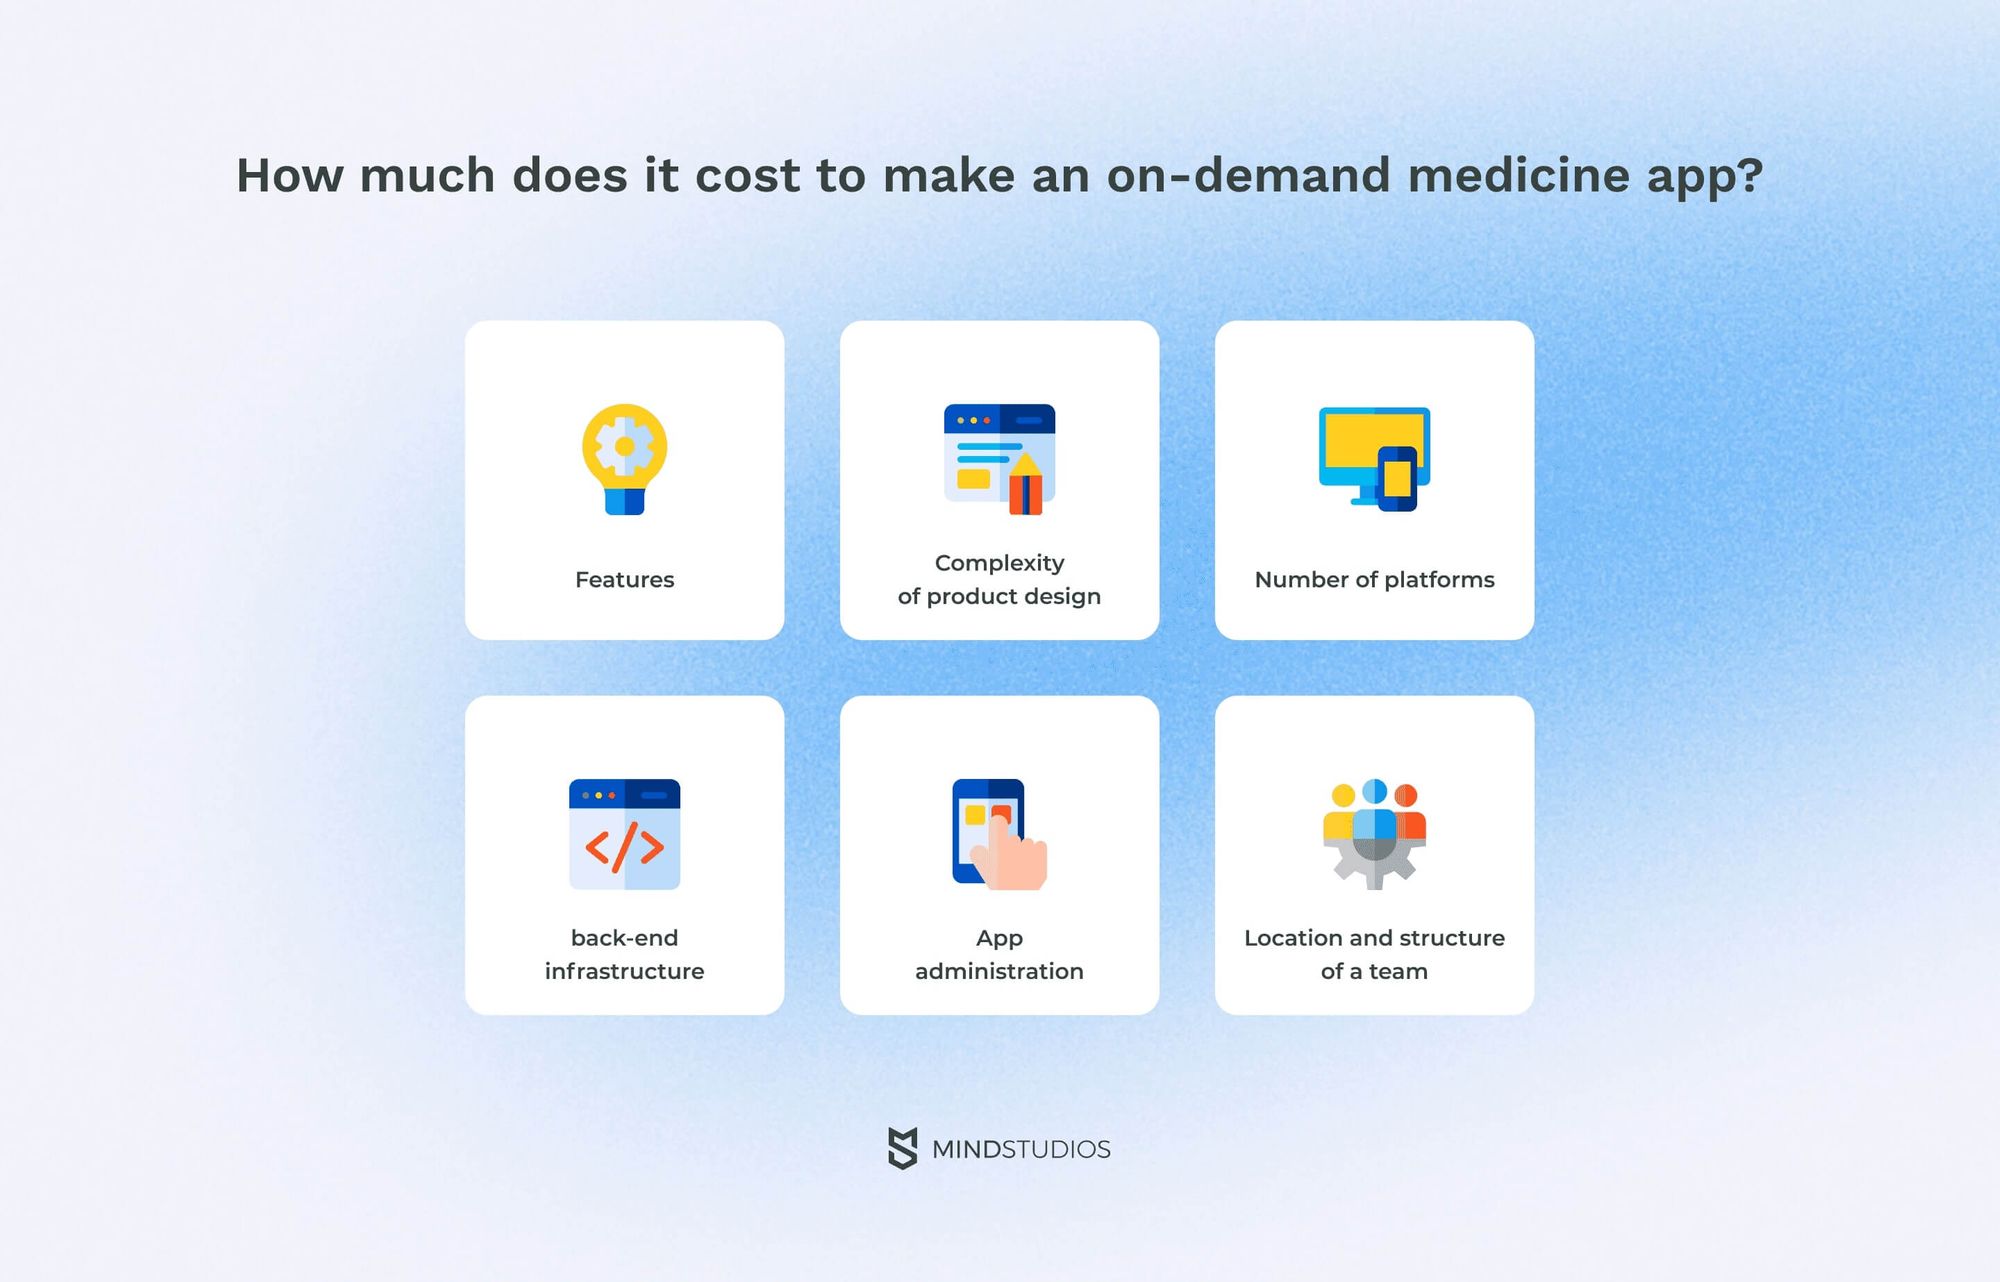 cost to make an on-demand medicine app